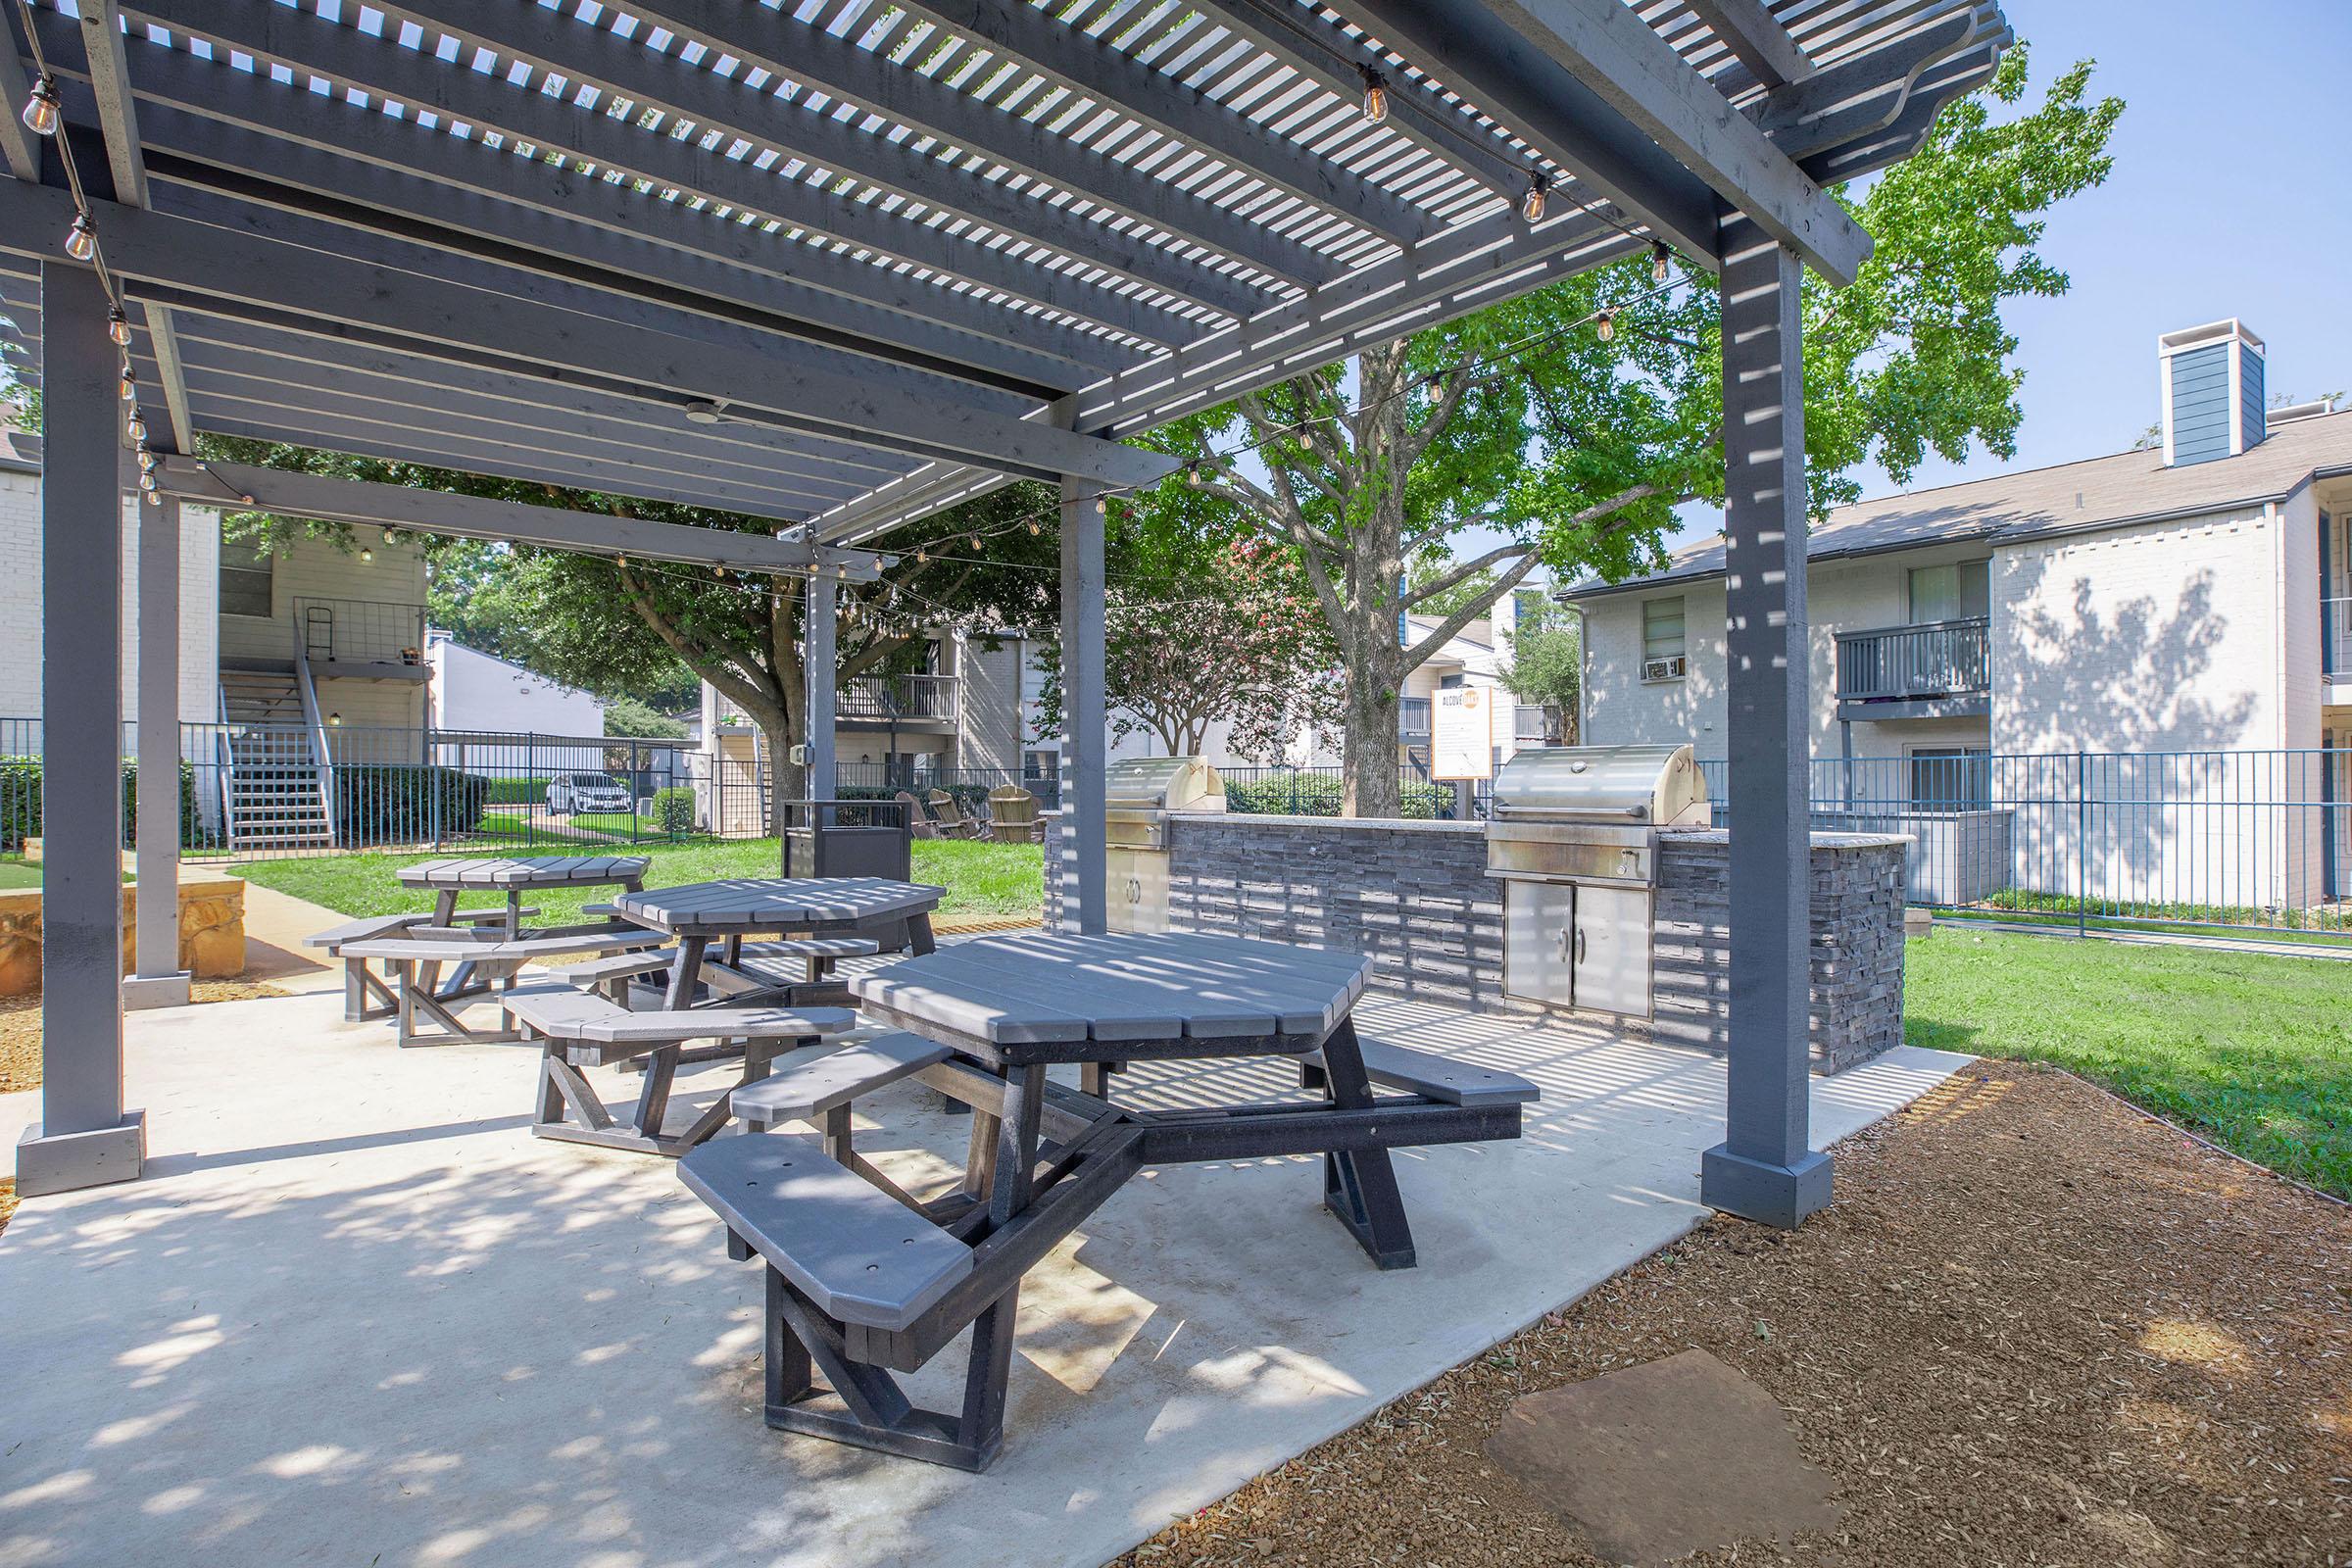 The BBQ area with grills and tables and benches at Rise North Arlington.